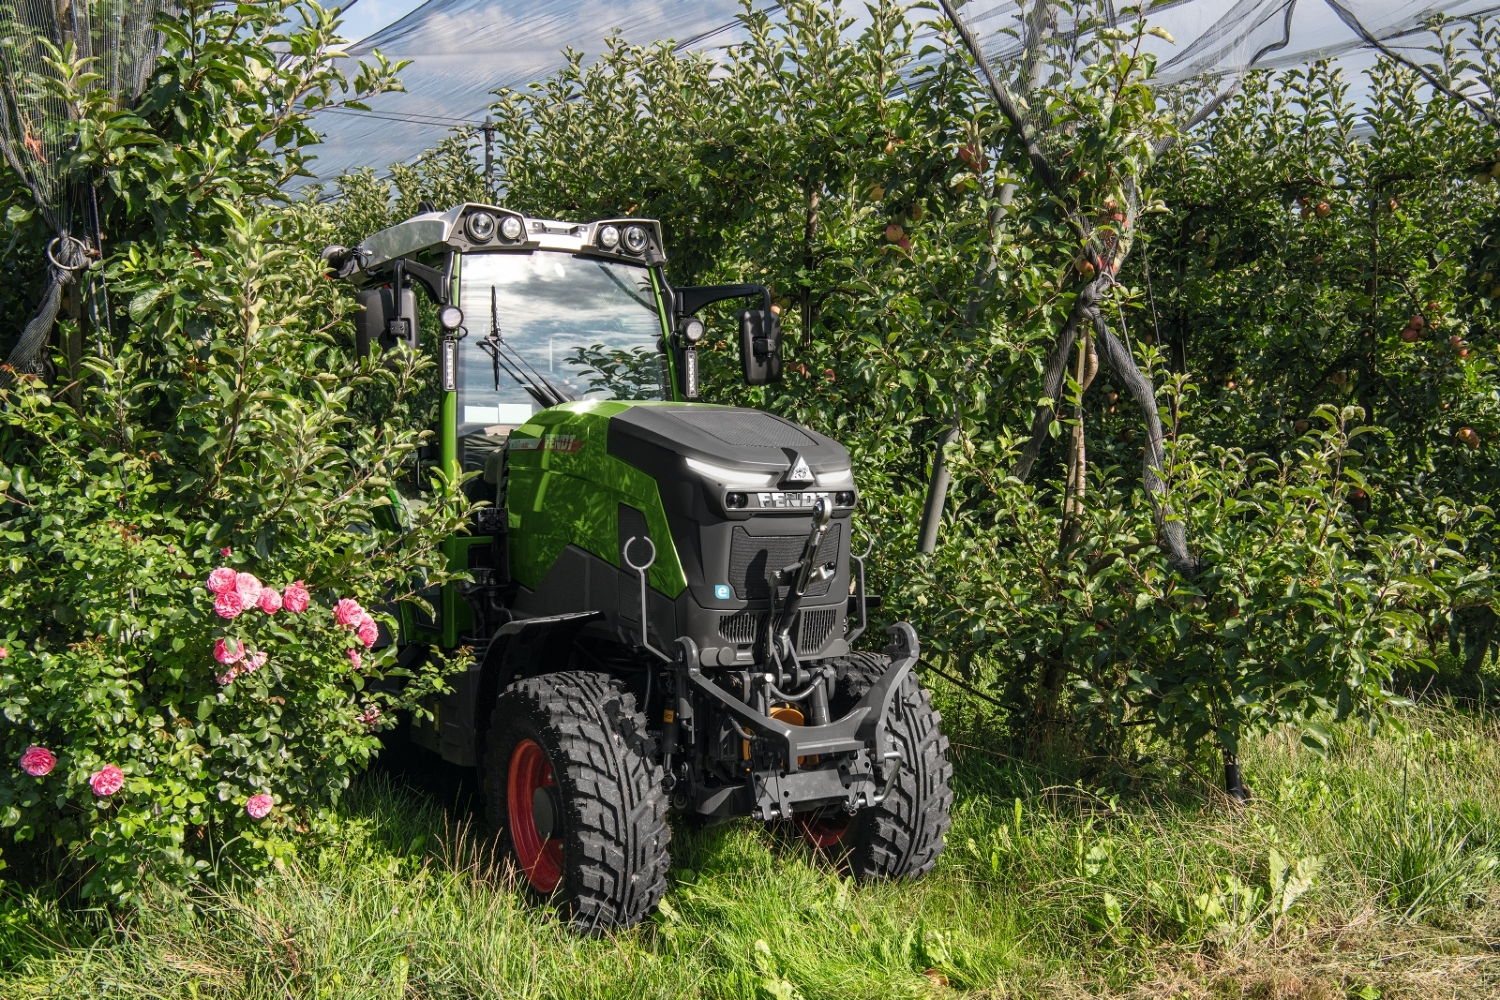 A Fendt e100 V Vario standing between rows of apple trees